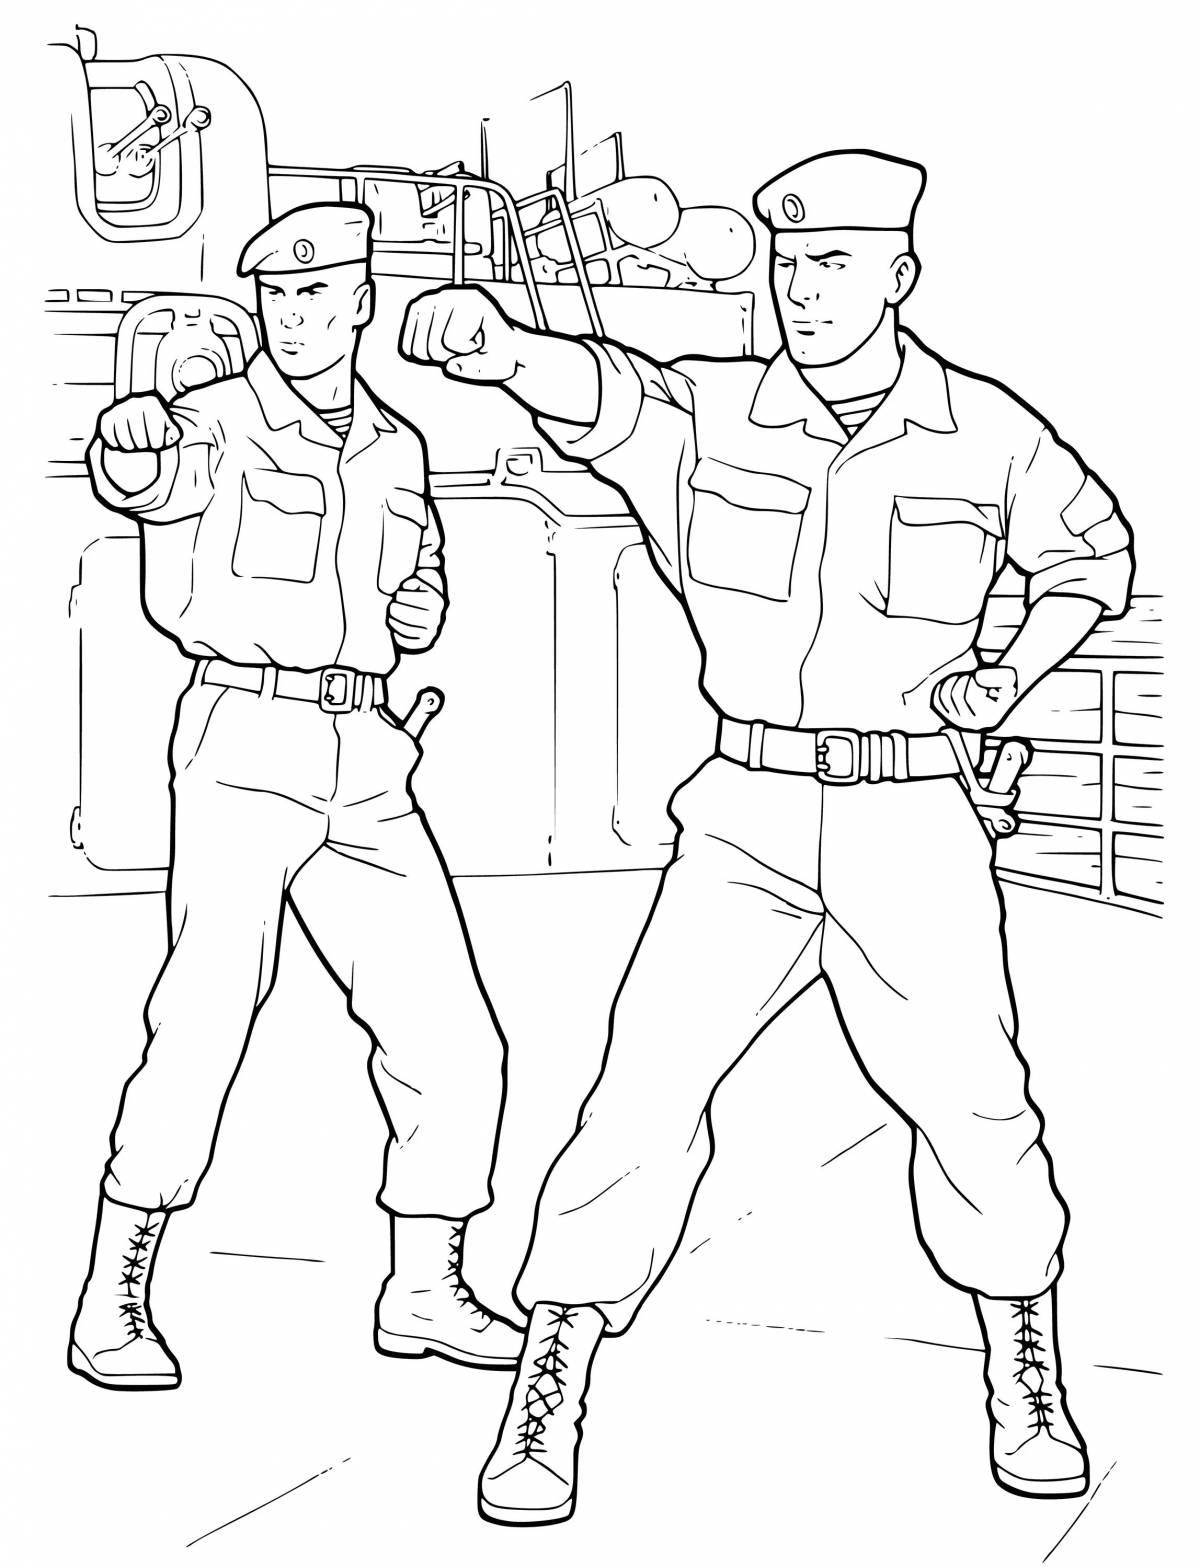 Courageous military soldiers coloring book for kids